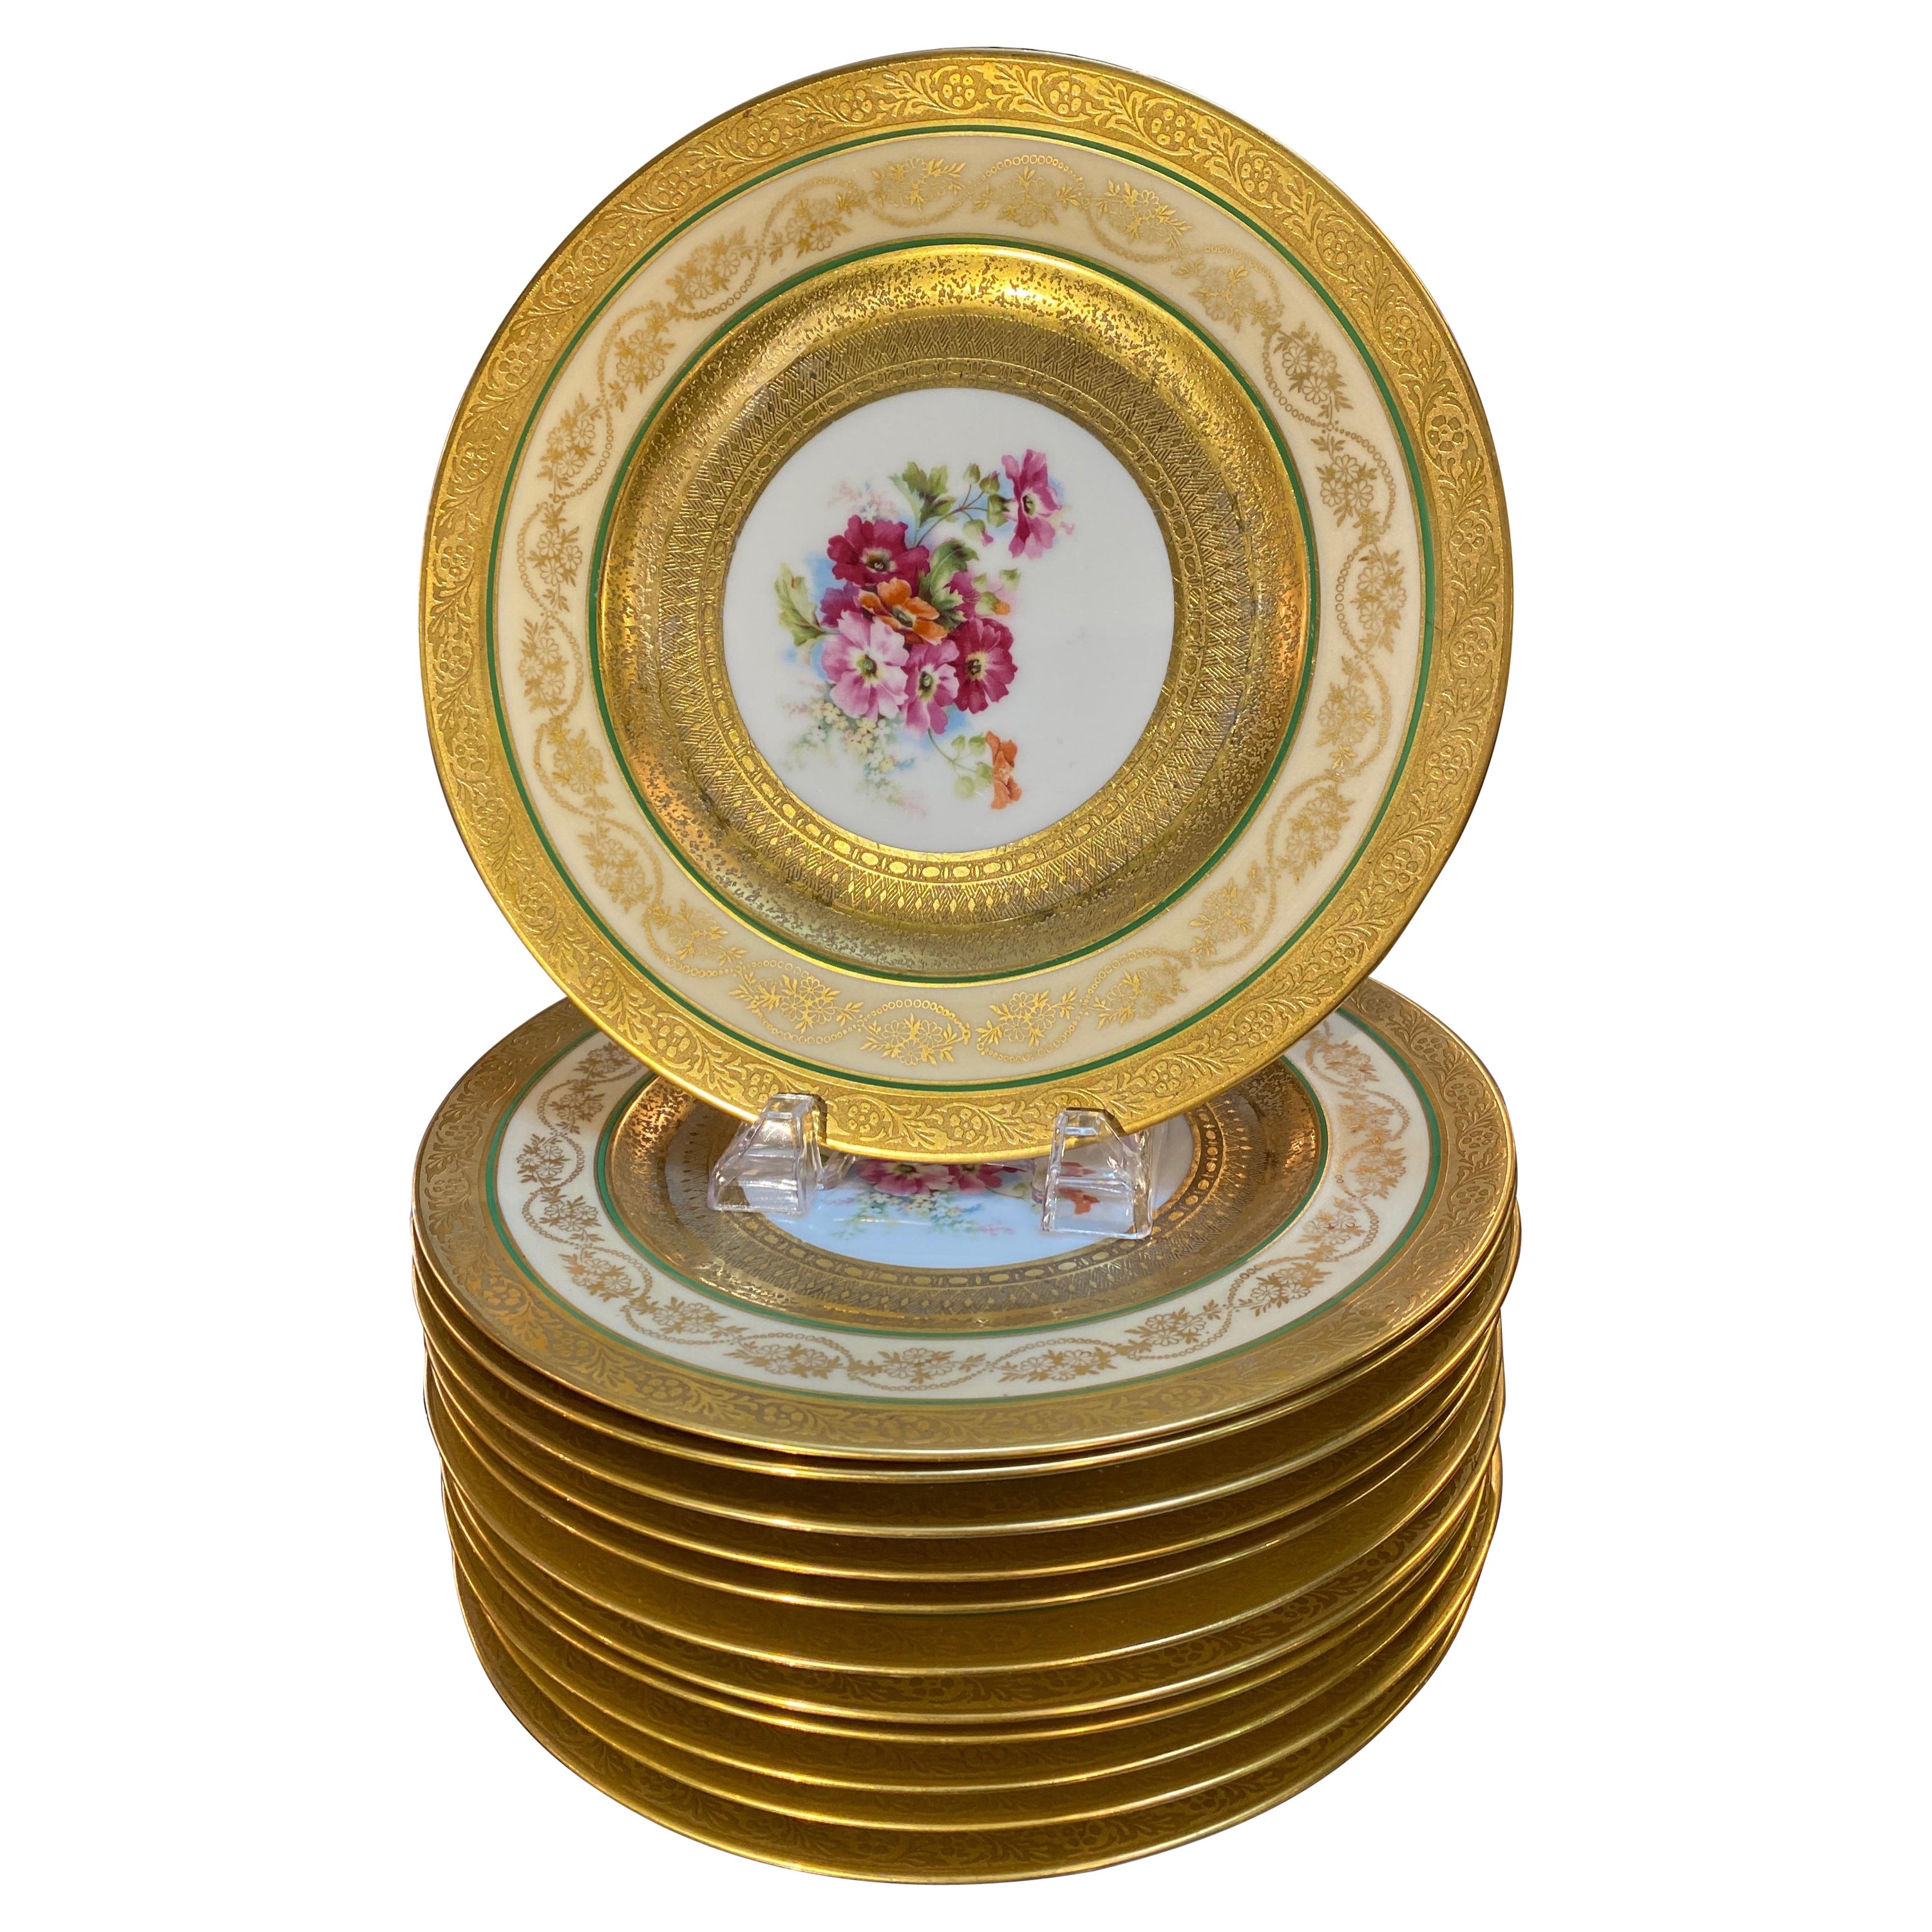 Set of 12 Gold Encrusted Floral Service Dinner Plates, 1920's Germany